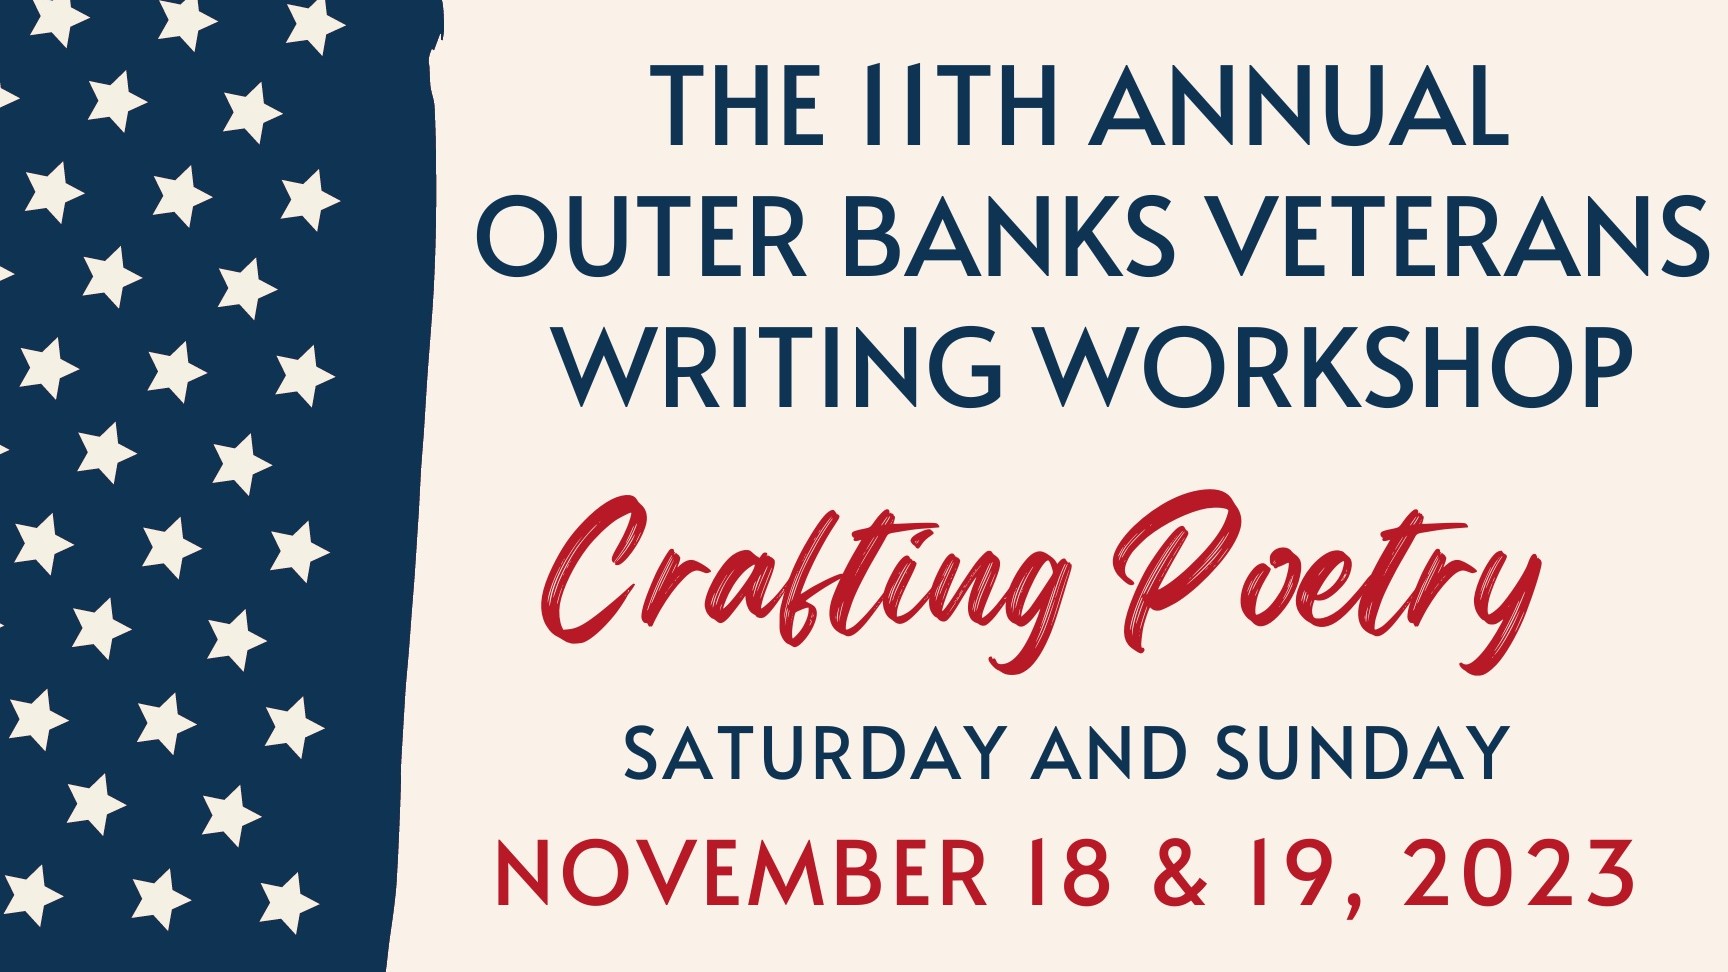 Registration now open for 11th annual Outer Banks Veterans Writing Workshop